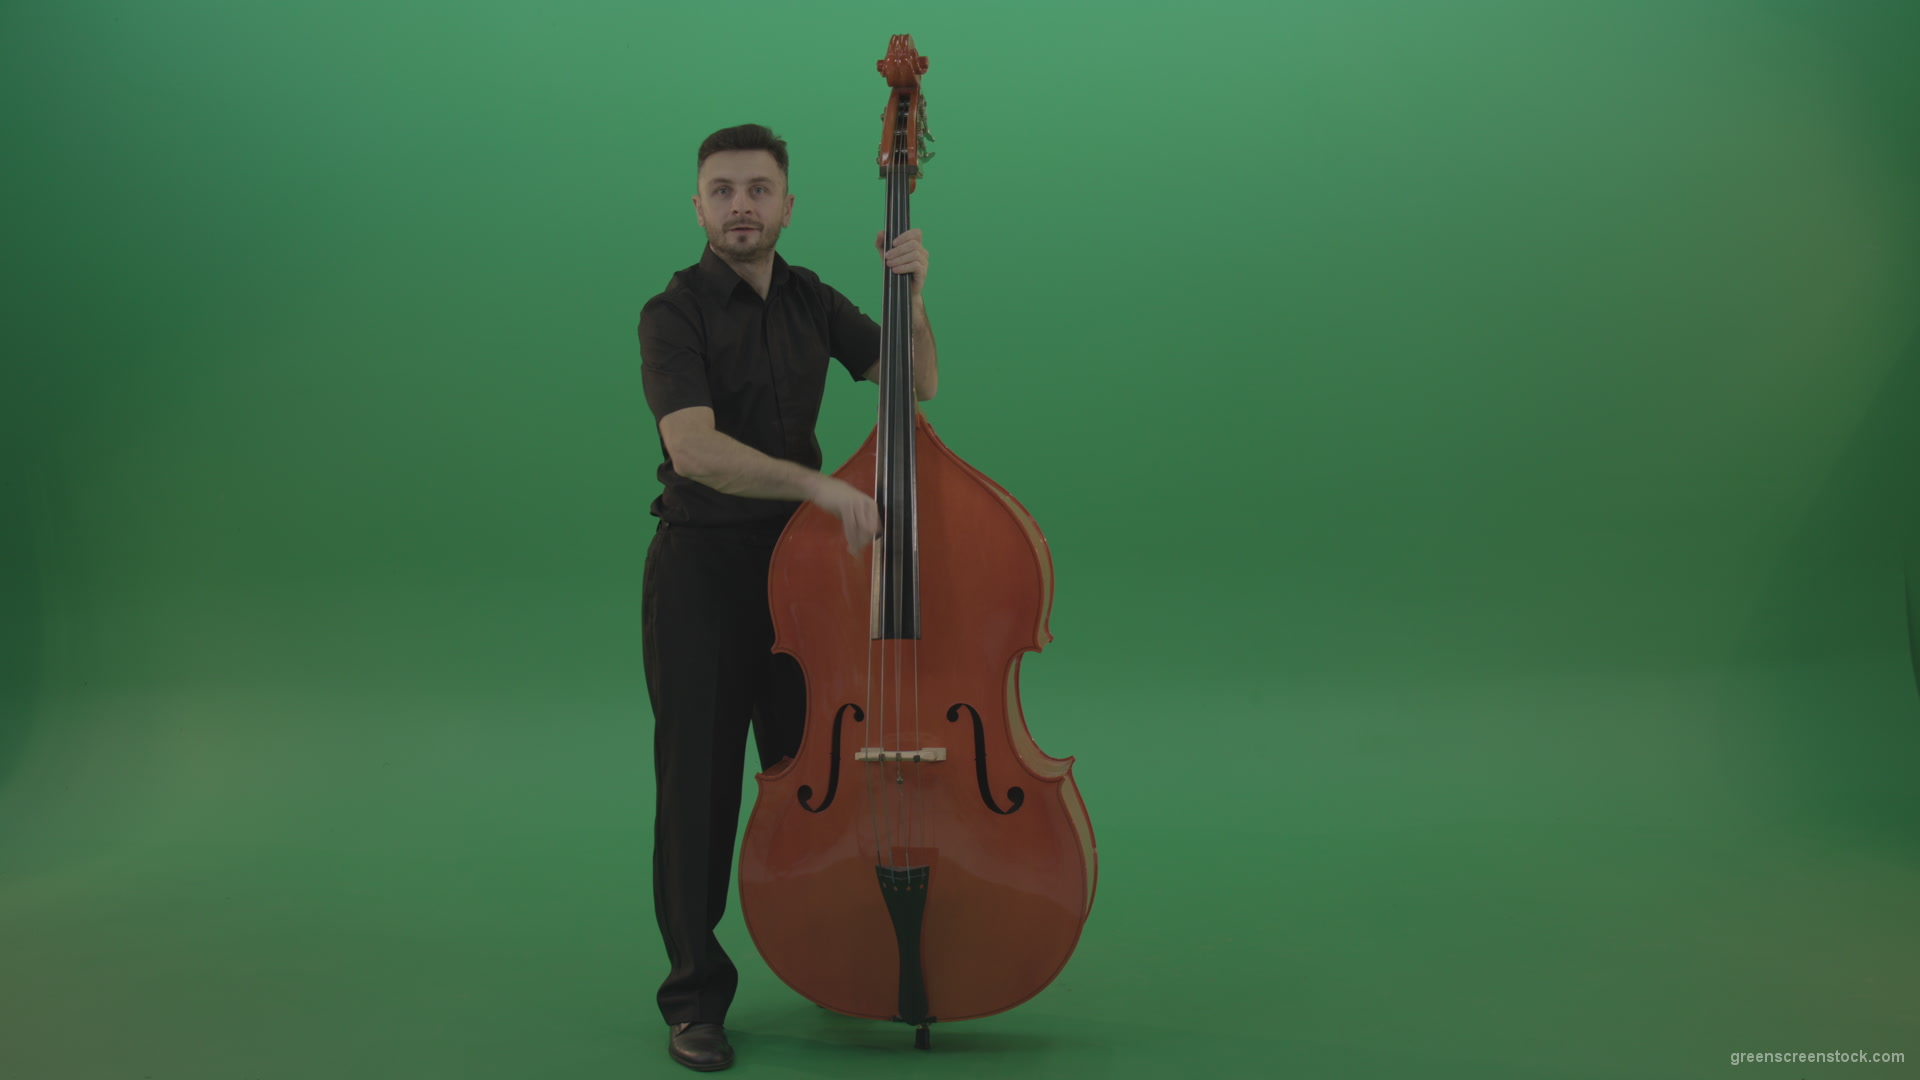 Full-size-man-in-black-uniform-play-jazz-rock-on-double-bass-String-music-instrument-isolated-on-green-screen_002 Green Screen Stock